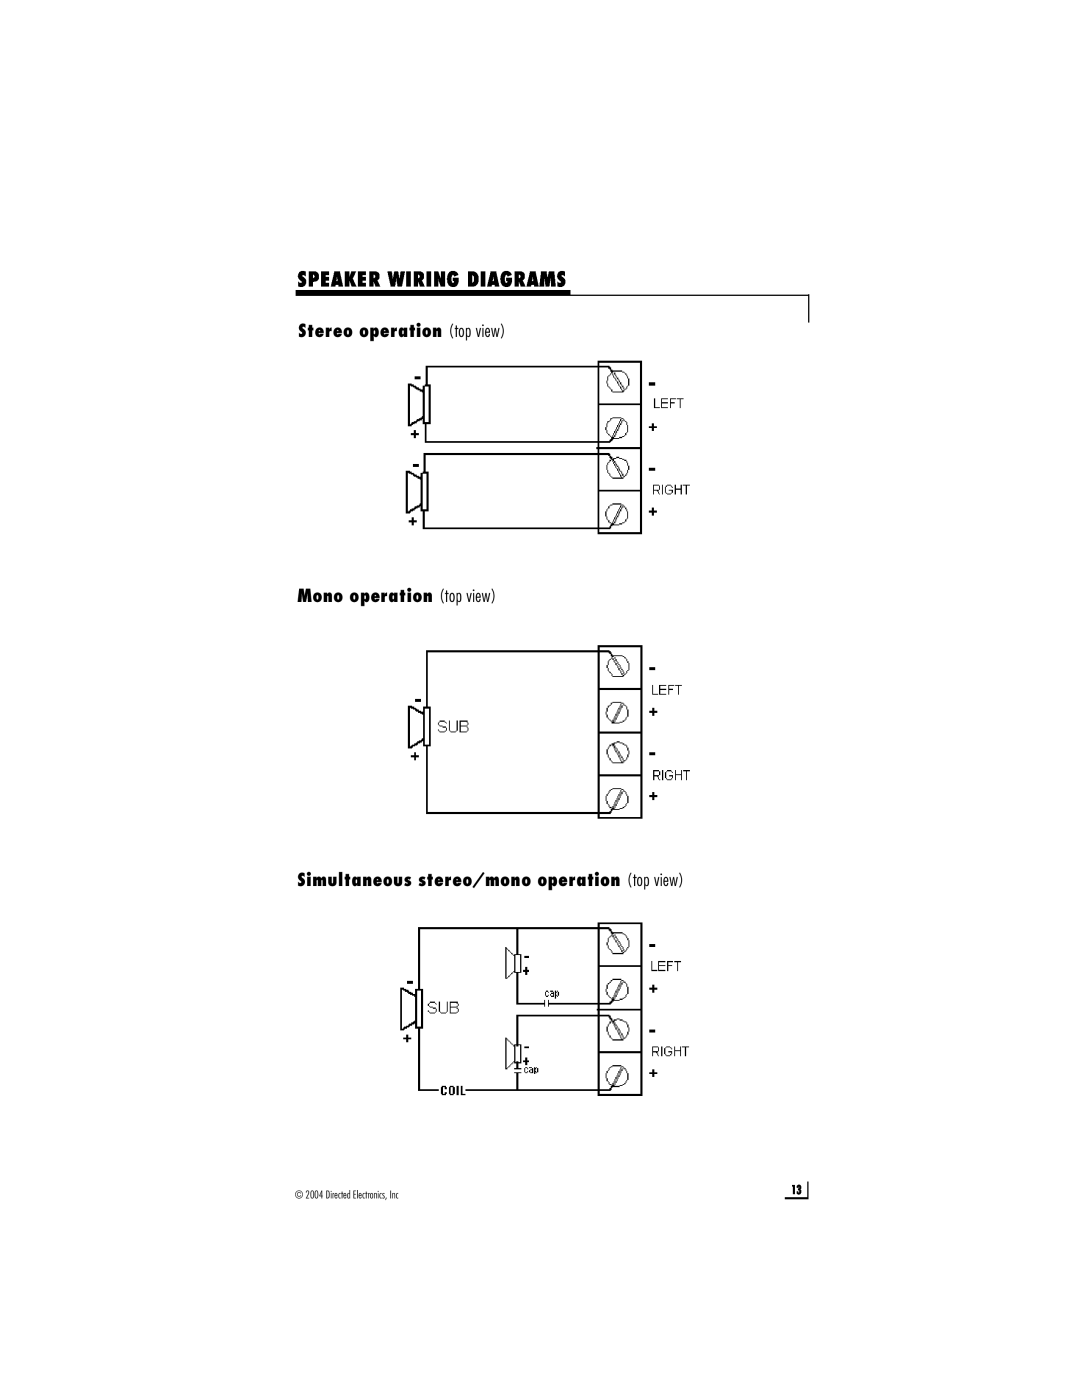 Directed Audio 1200T manual Speaker Wiring Diagrams, Stereo operation top view Mono operation top view 